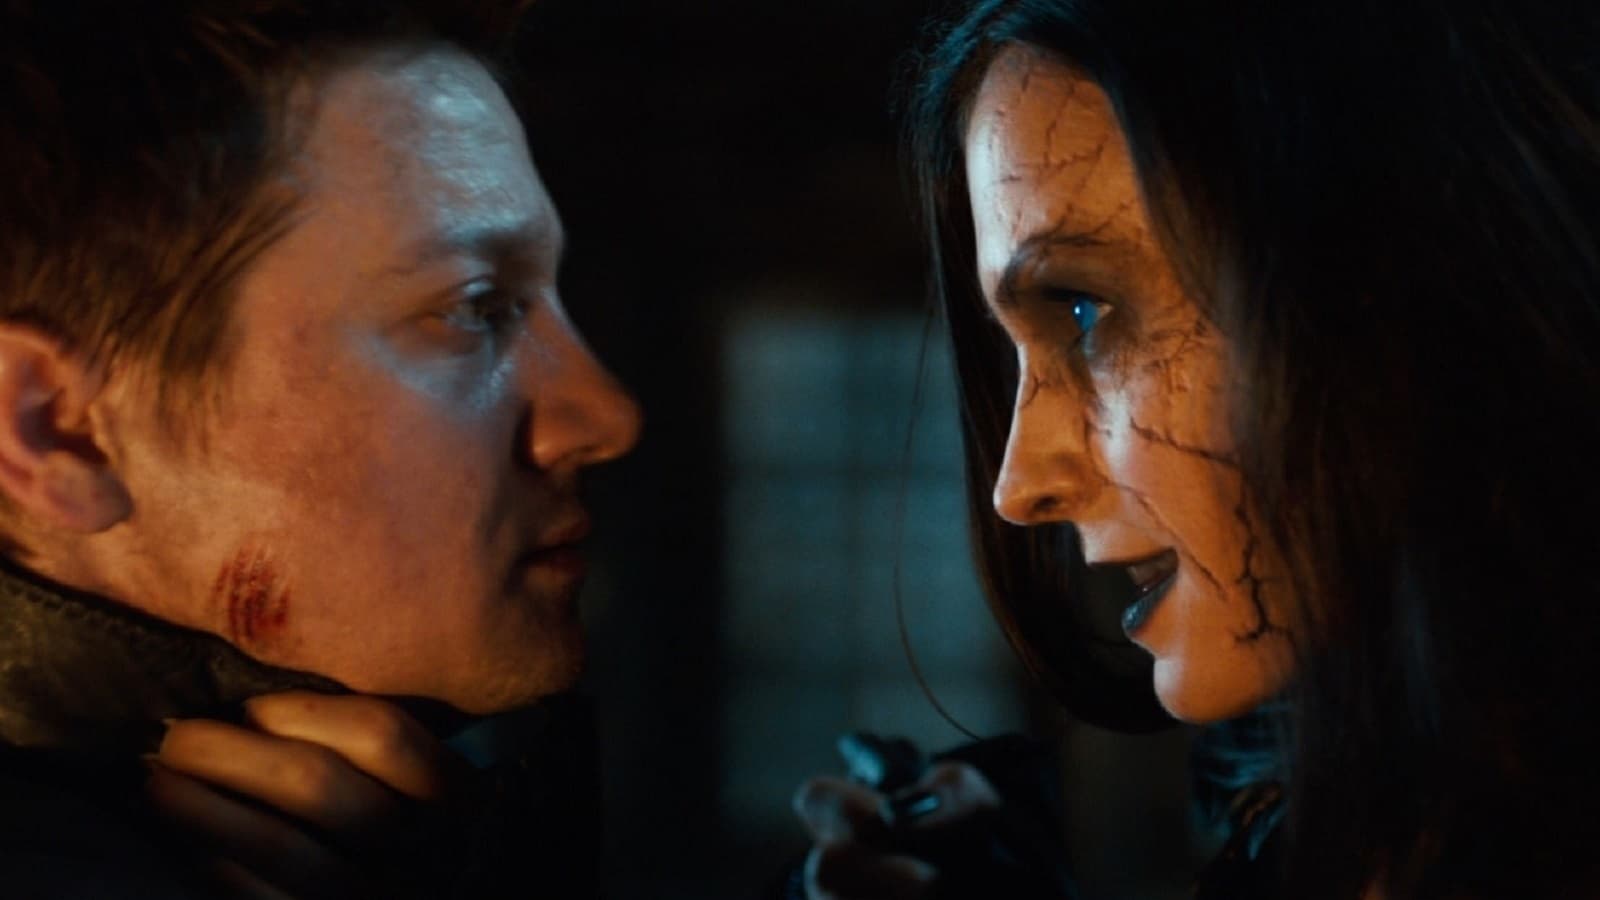 Hansel And Gretel - Witch Hunters